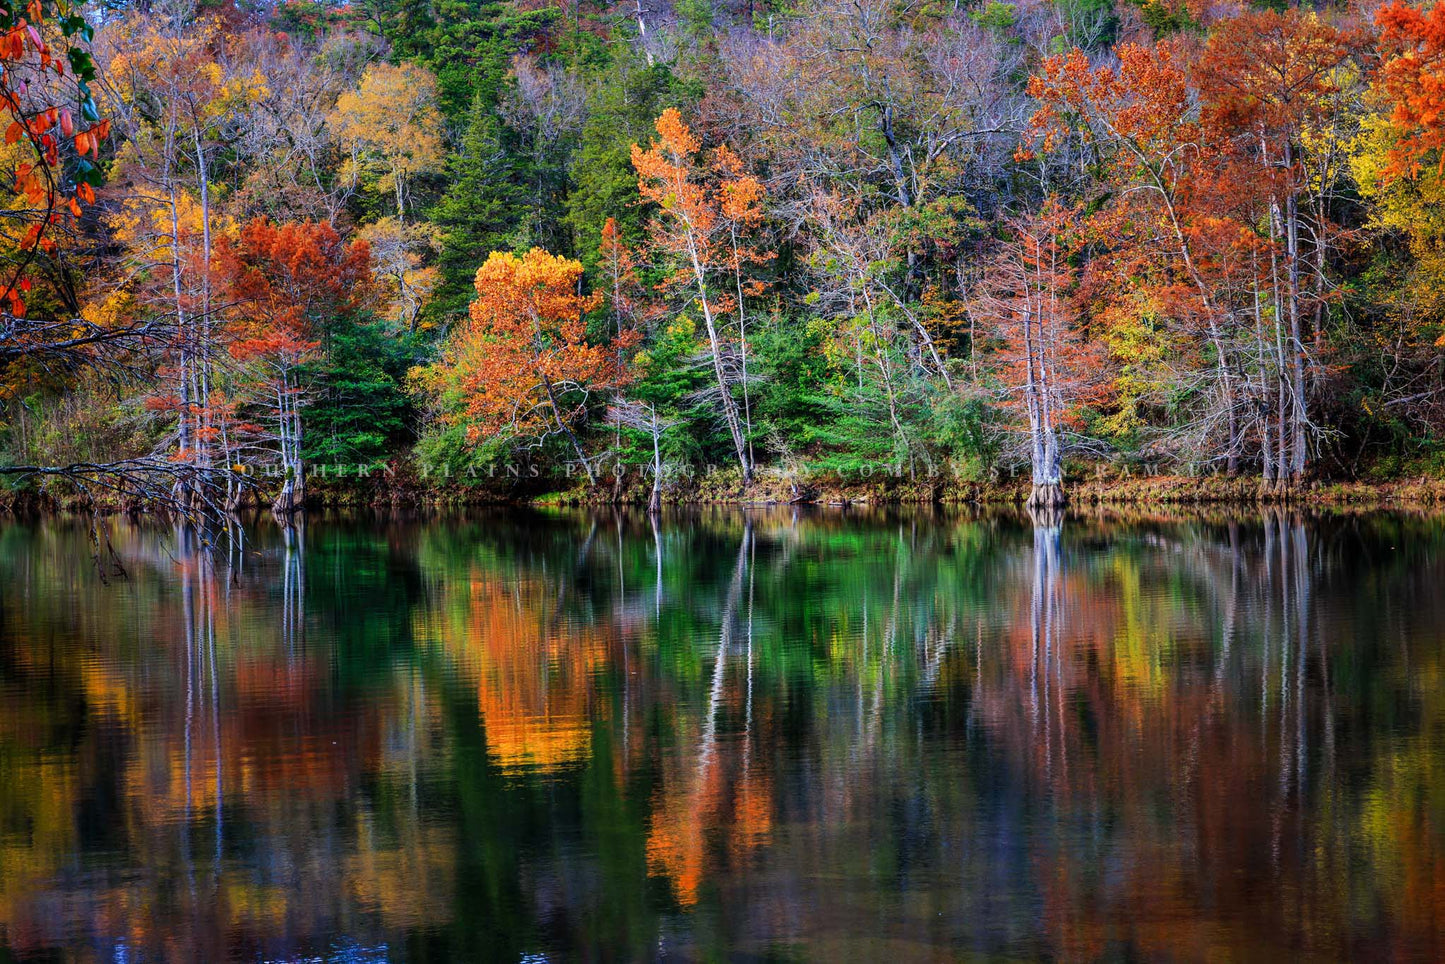 Forest Photography Print (Not Framed) Picture of Trees with Fall Foliage Reflecting in River at Beavers Bend State Park Oklahoma Autumn Wall Art Nature Decor